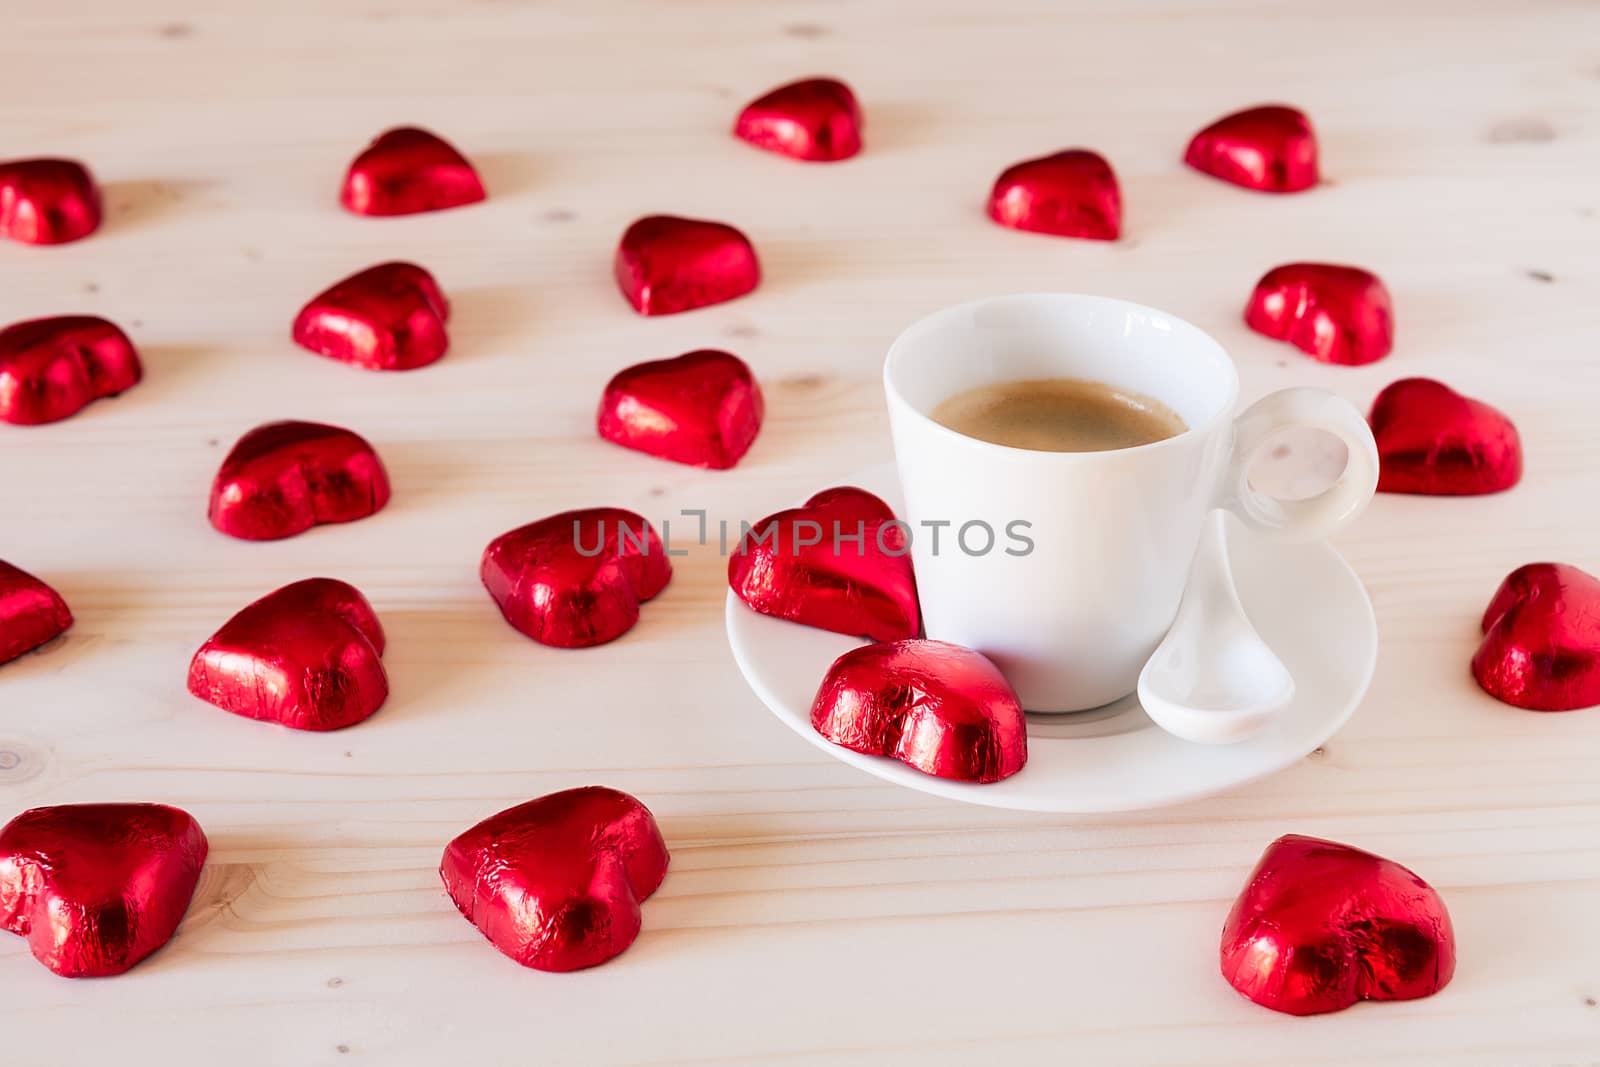 Chocolate hearts for romantic day by LuigiMorbidelli